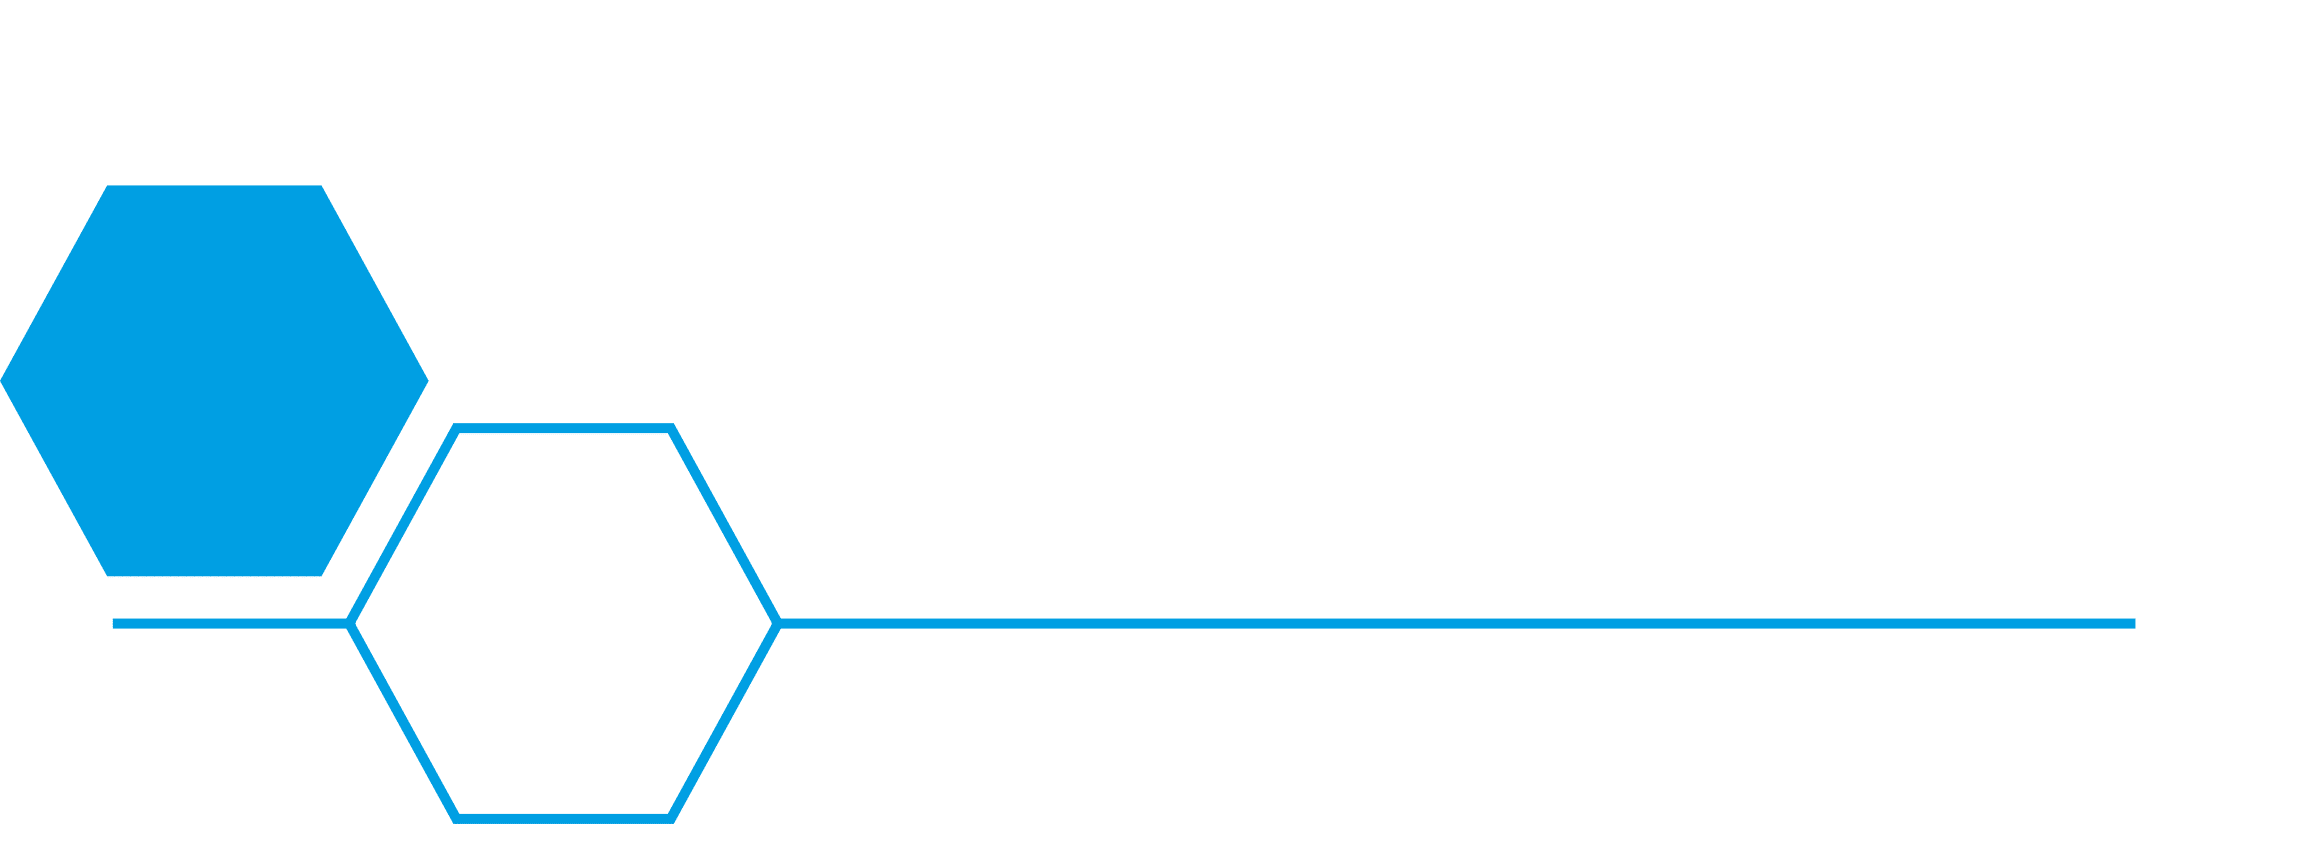 4-MYND IT Solutions